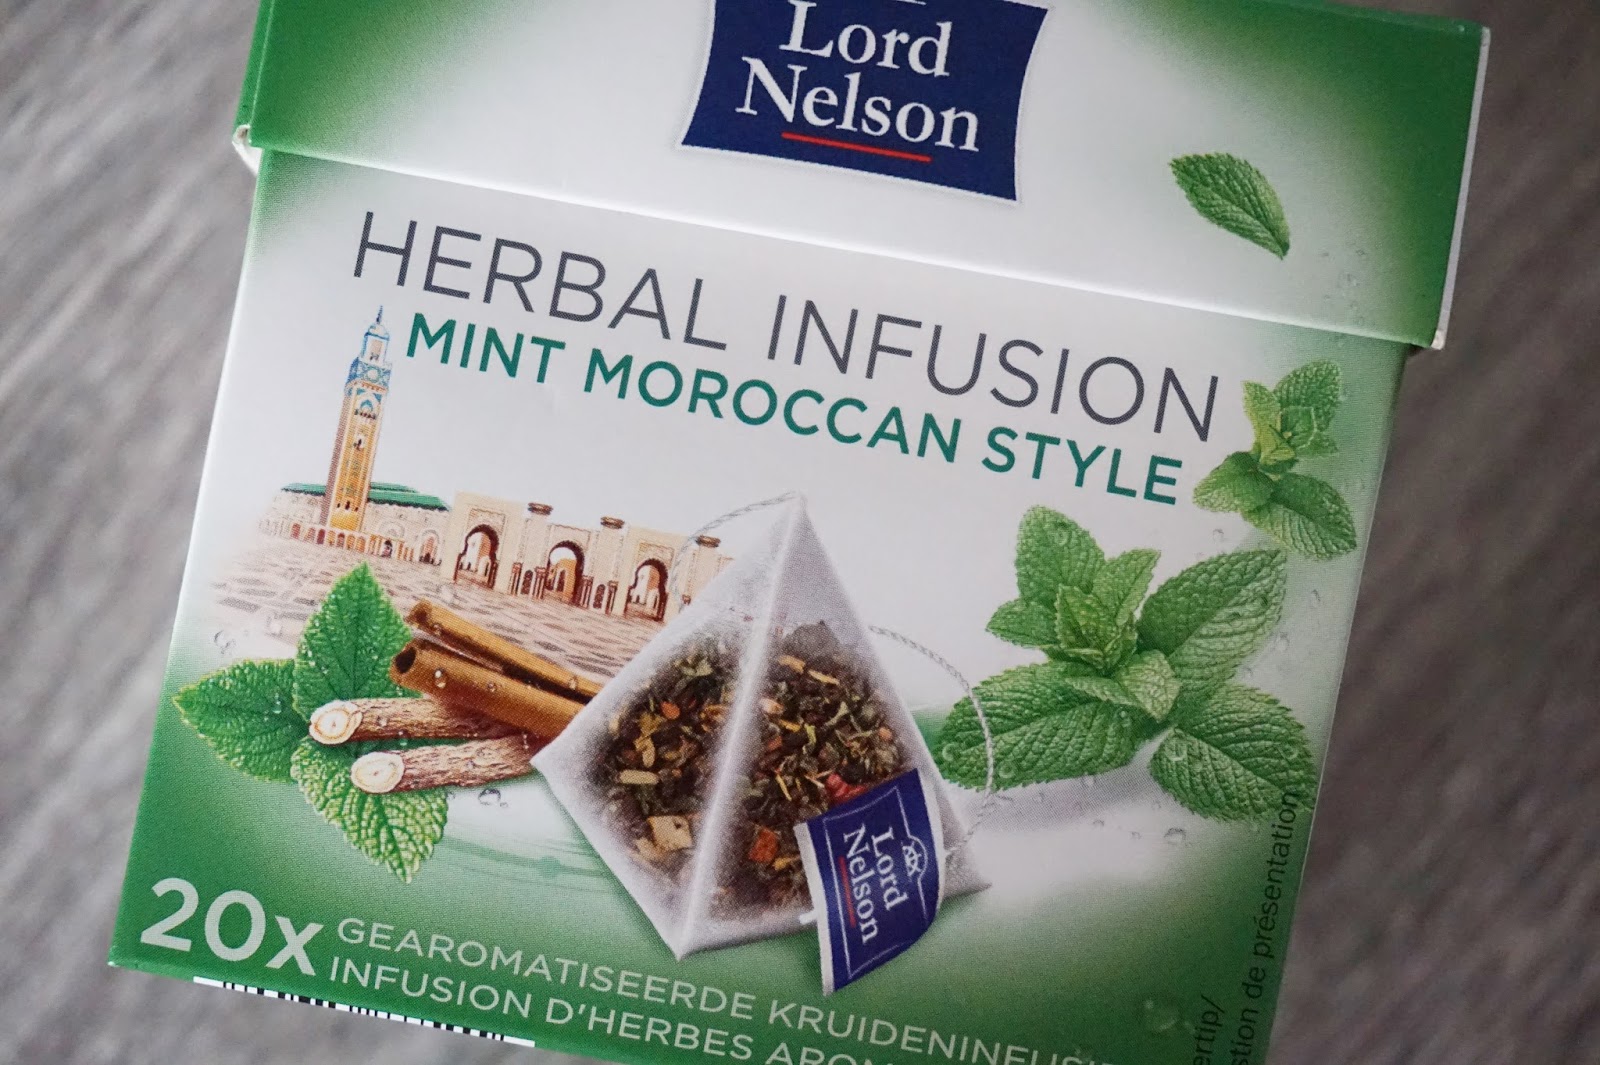 lord nelson herbal infusion mint moroccan style thee lidl